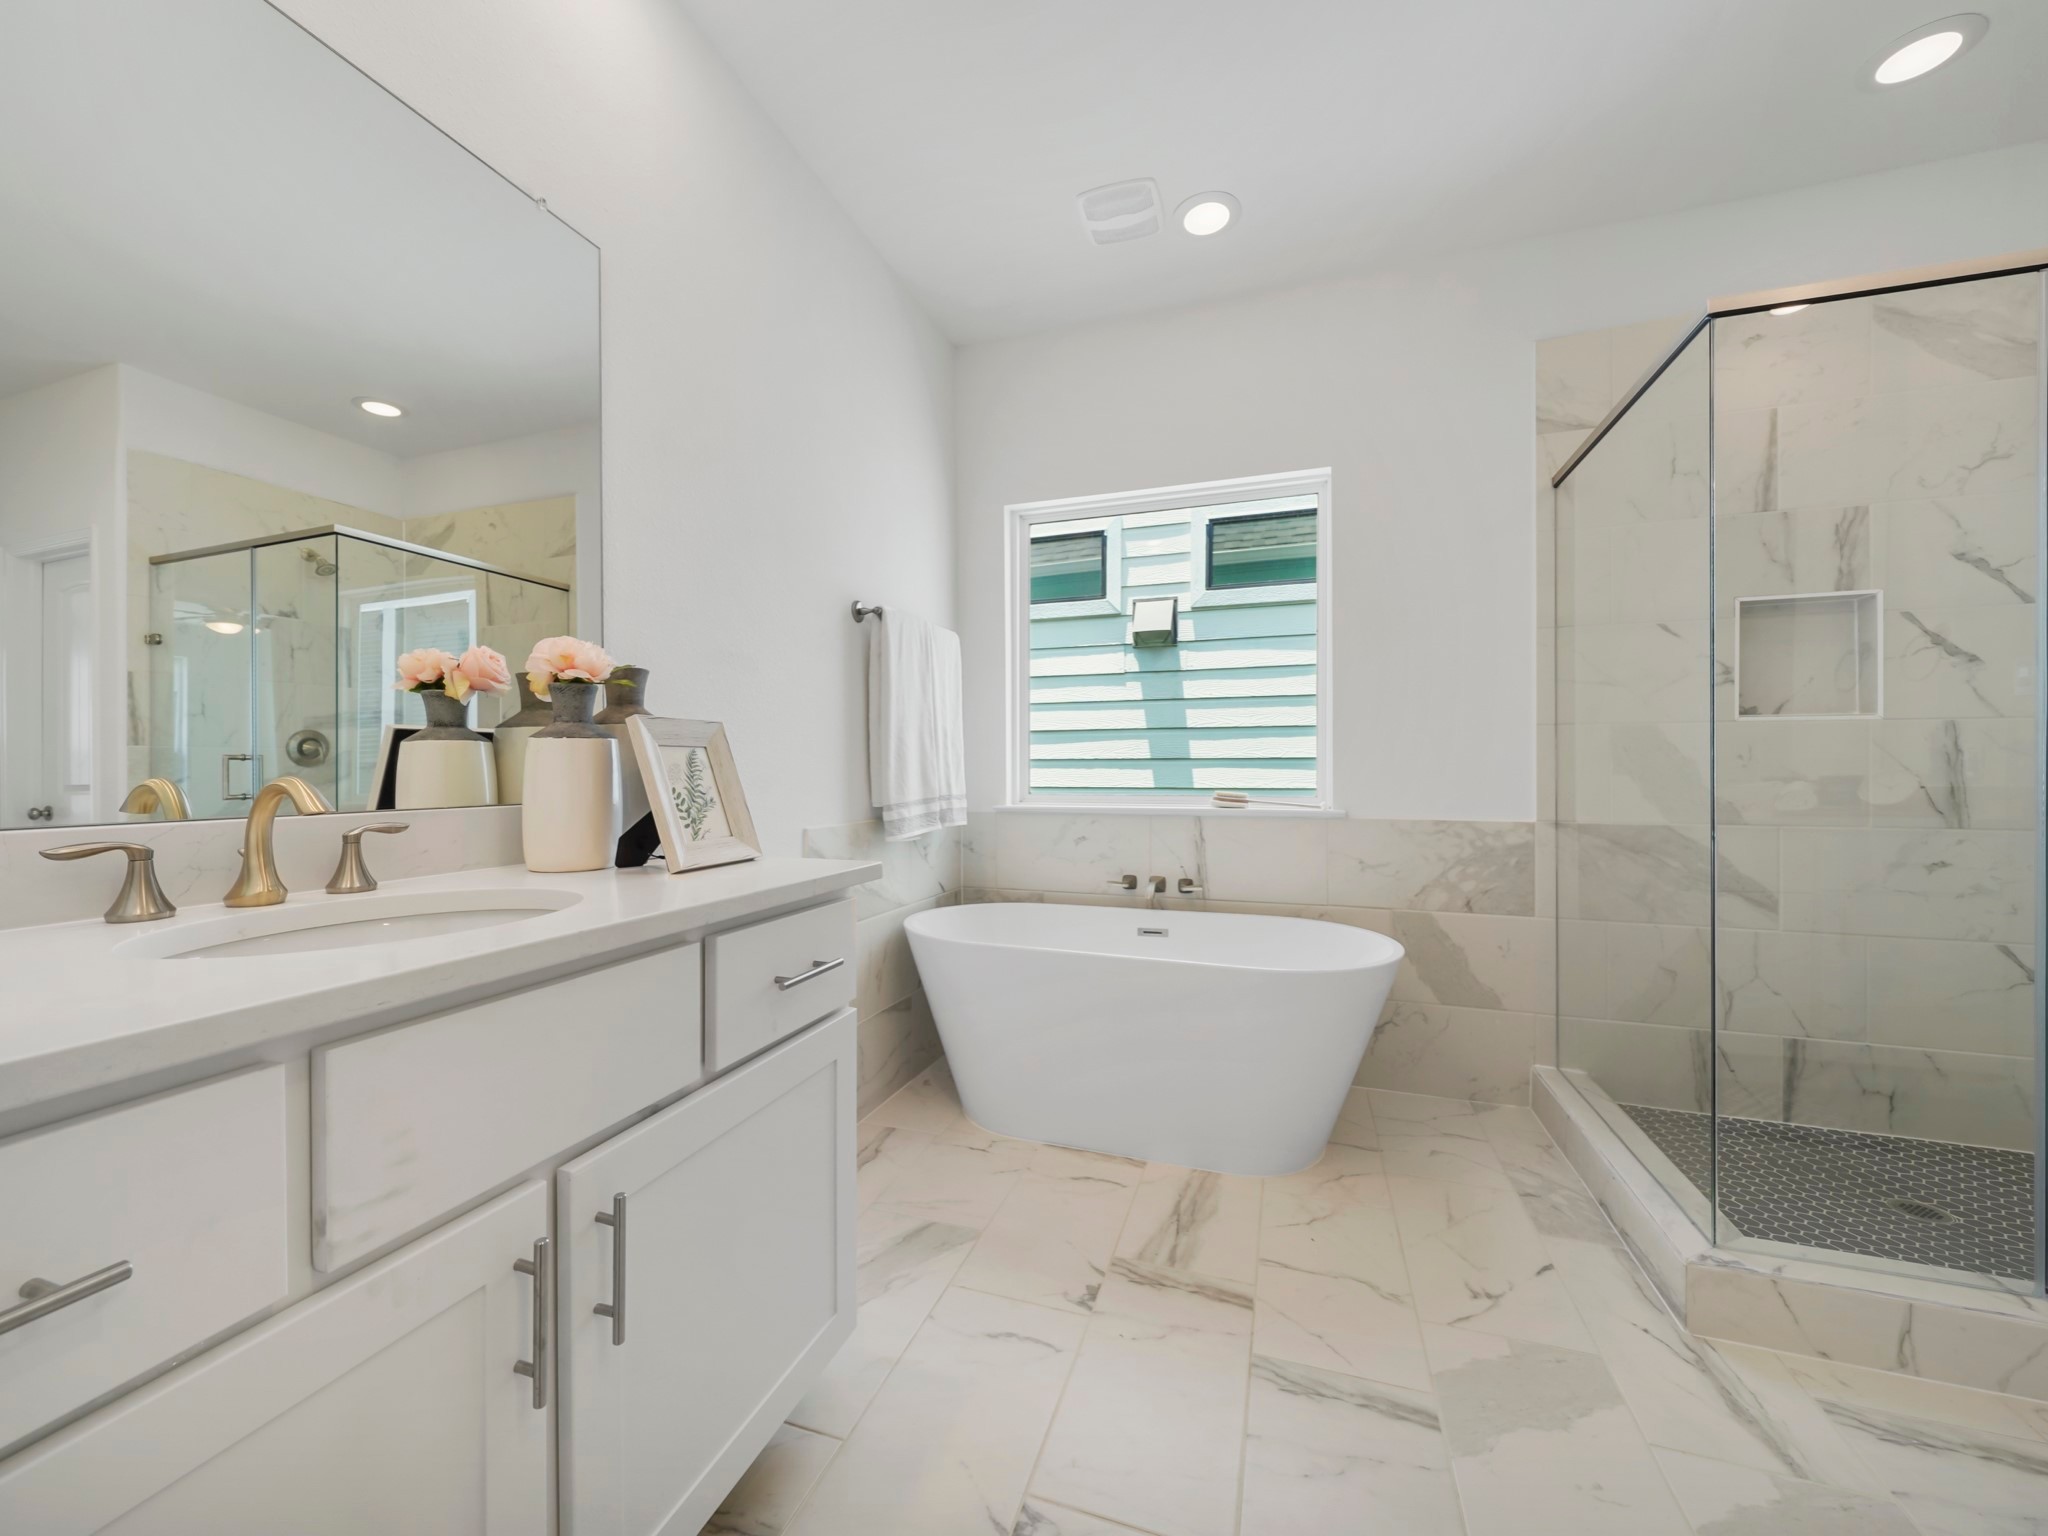 Step into the spa-like Primary Bath! The space features two vanities, custom cabinets, and stunning quartz countertops.